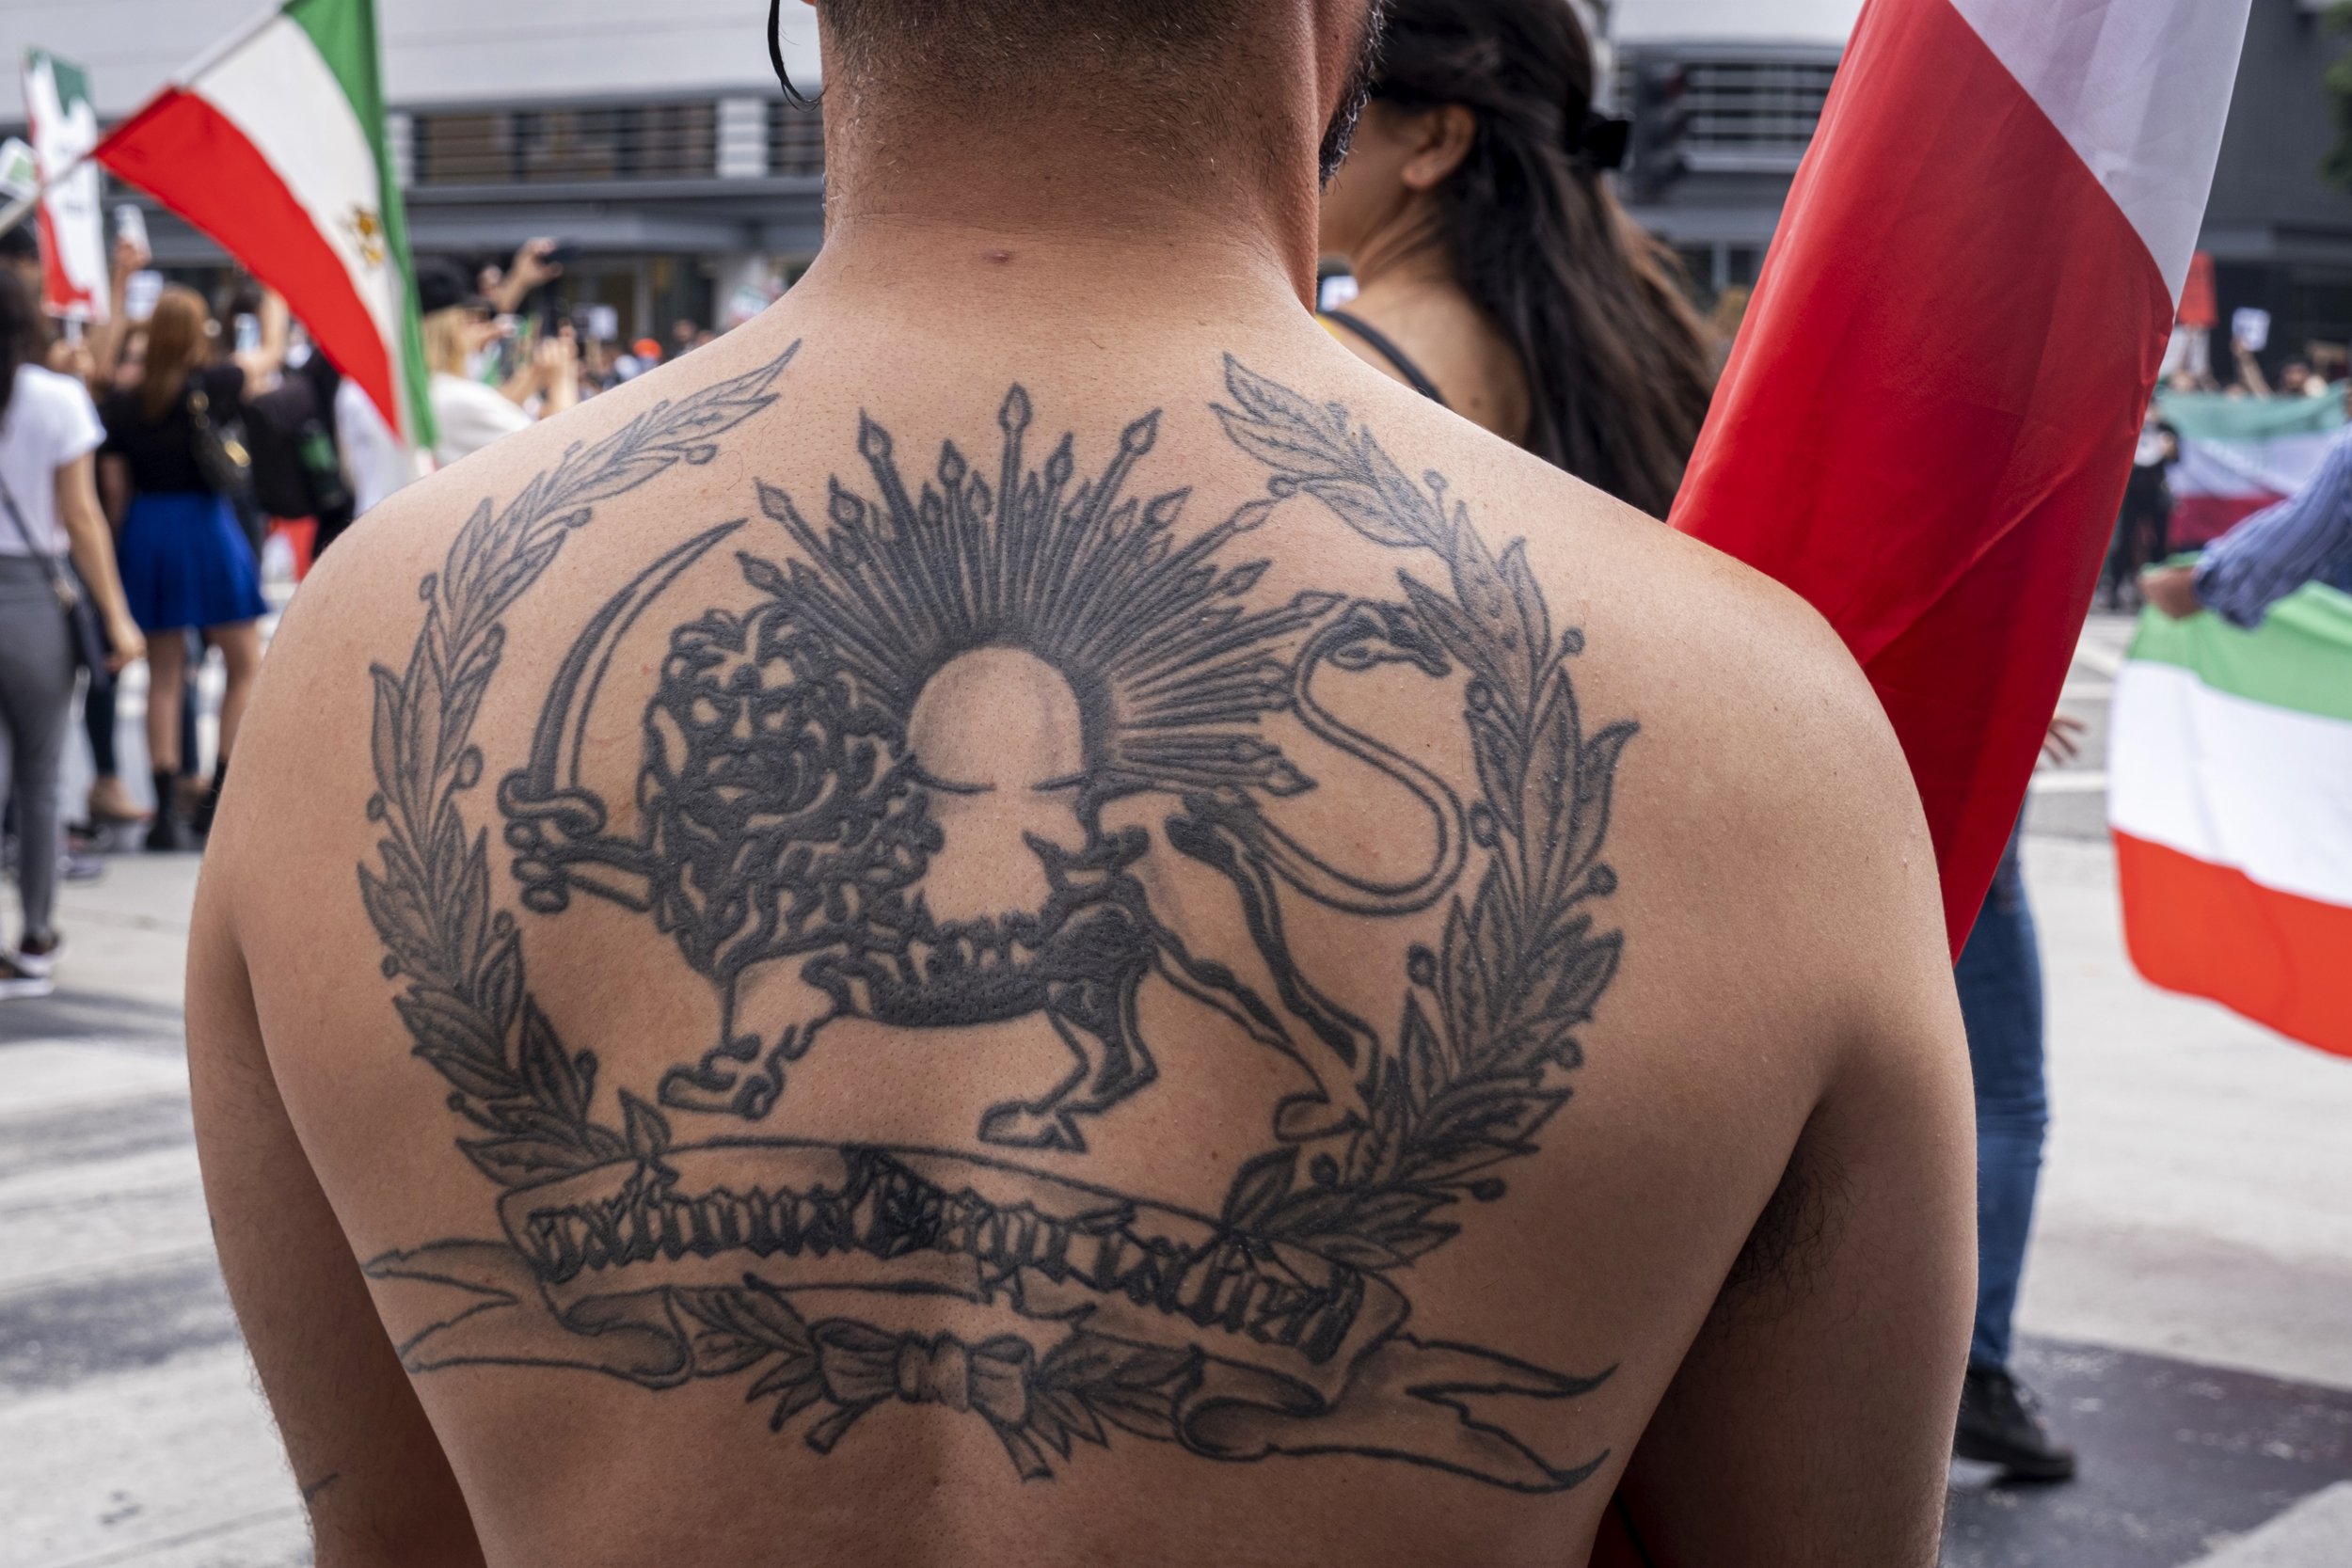  Tattoo of the lion and sun symbol, which sits in the middle of the Iranian flags. This symbol was changed with the new regime, so as protestors call for a regime change, they carry the flag with this symbol. March for Iran at Third Street Promenade 